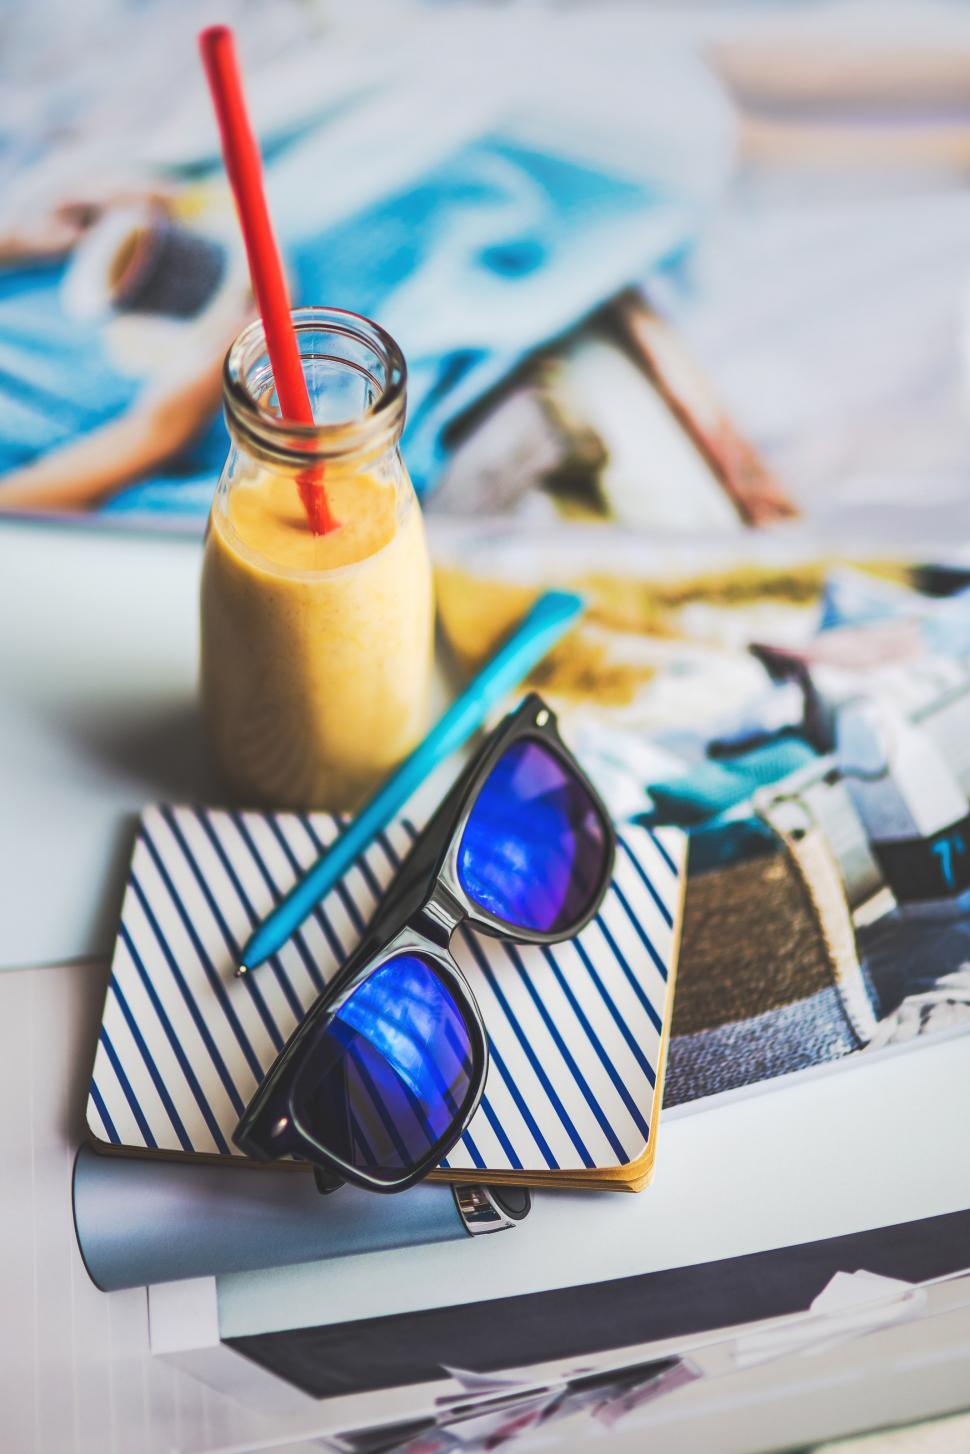 Free Image of Sunglasses Resting on Table 